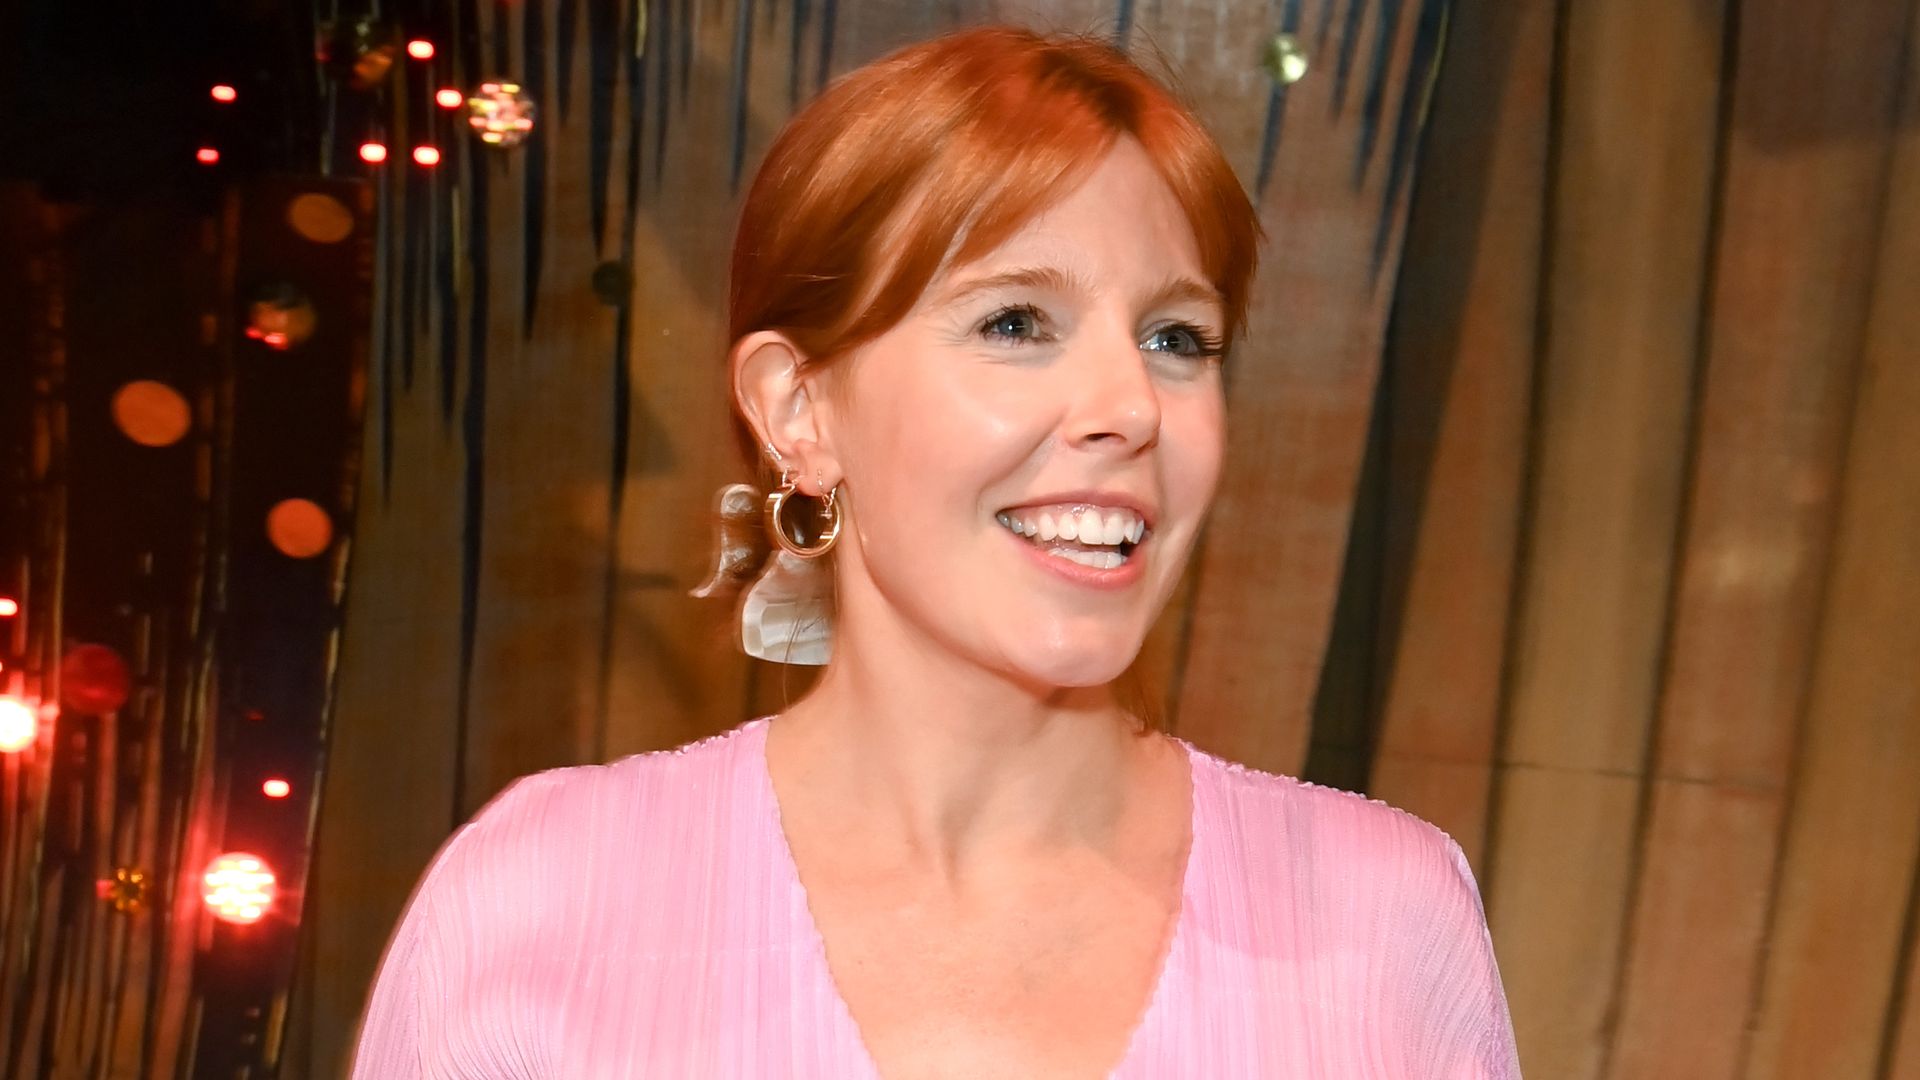 Stacey Dooley attends the "Strictly Ballroom" after party 